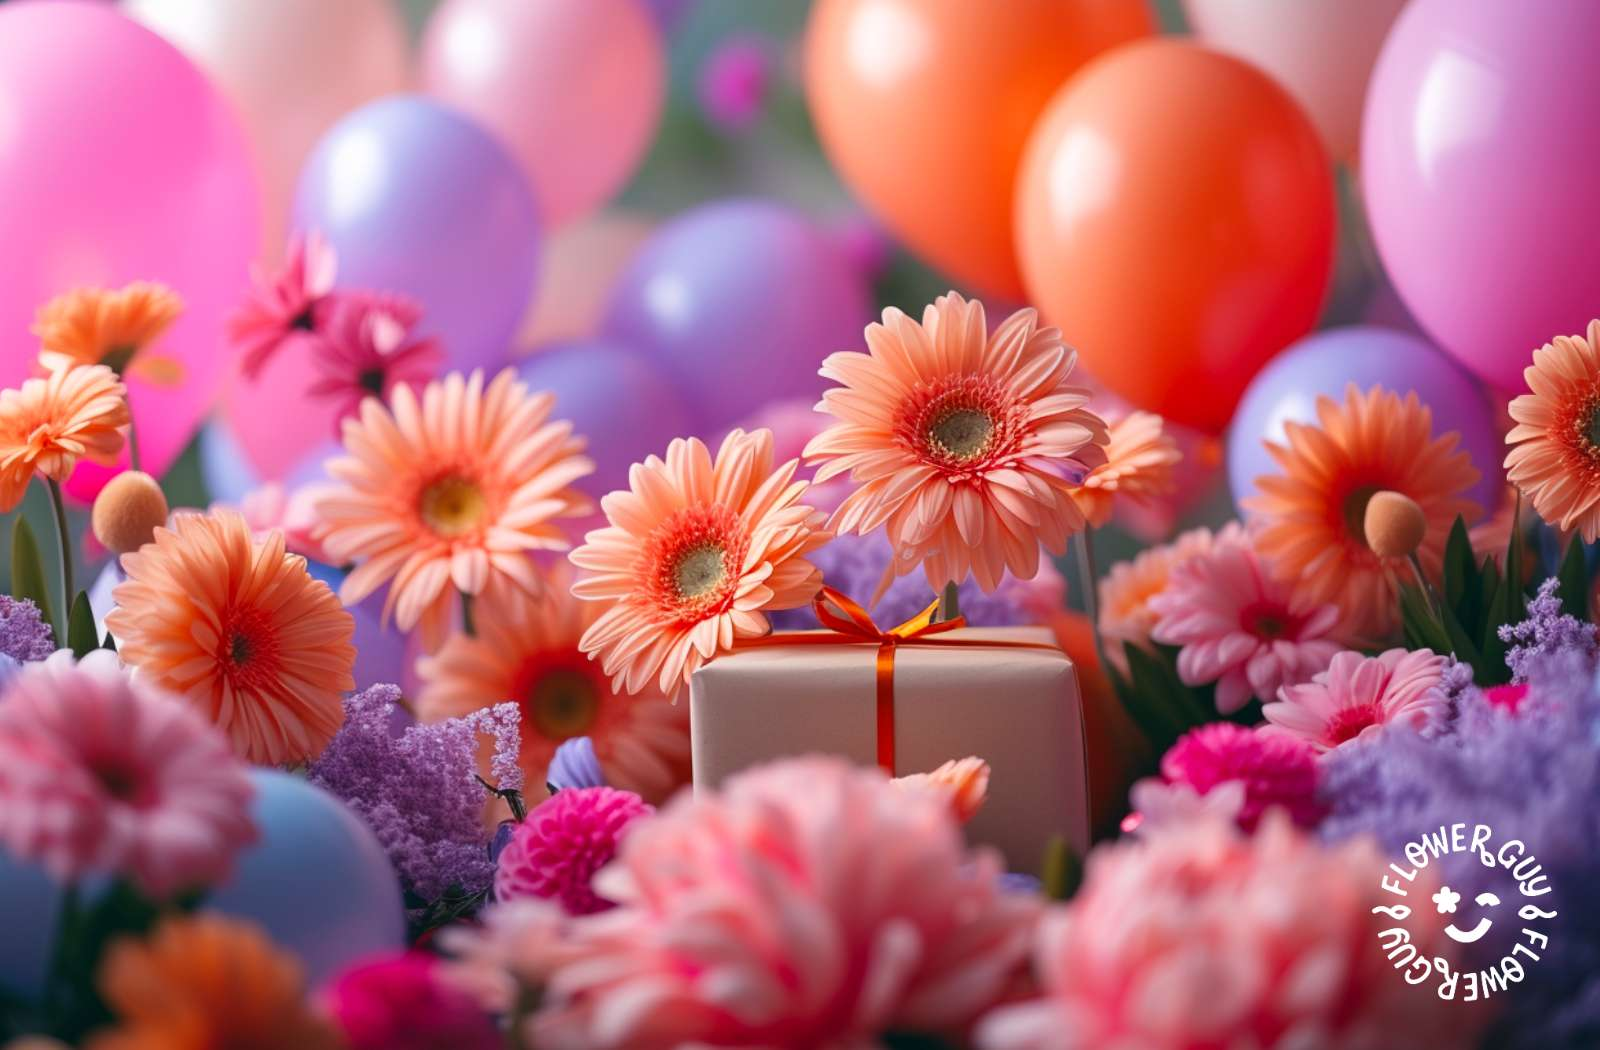 Flowers, gifts and balloons for the birthday girl. Say happy birthday with the best birthday Cape Town gifts